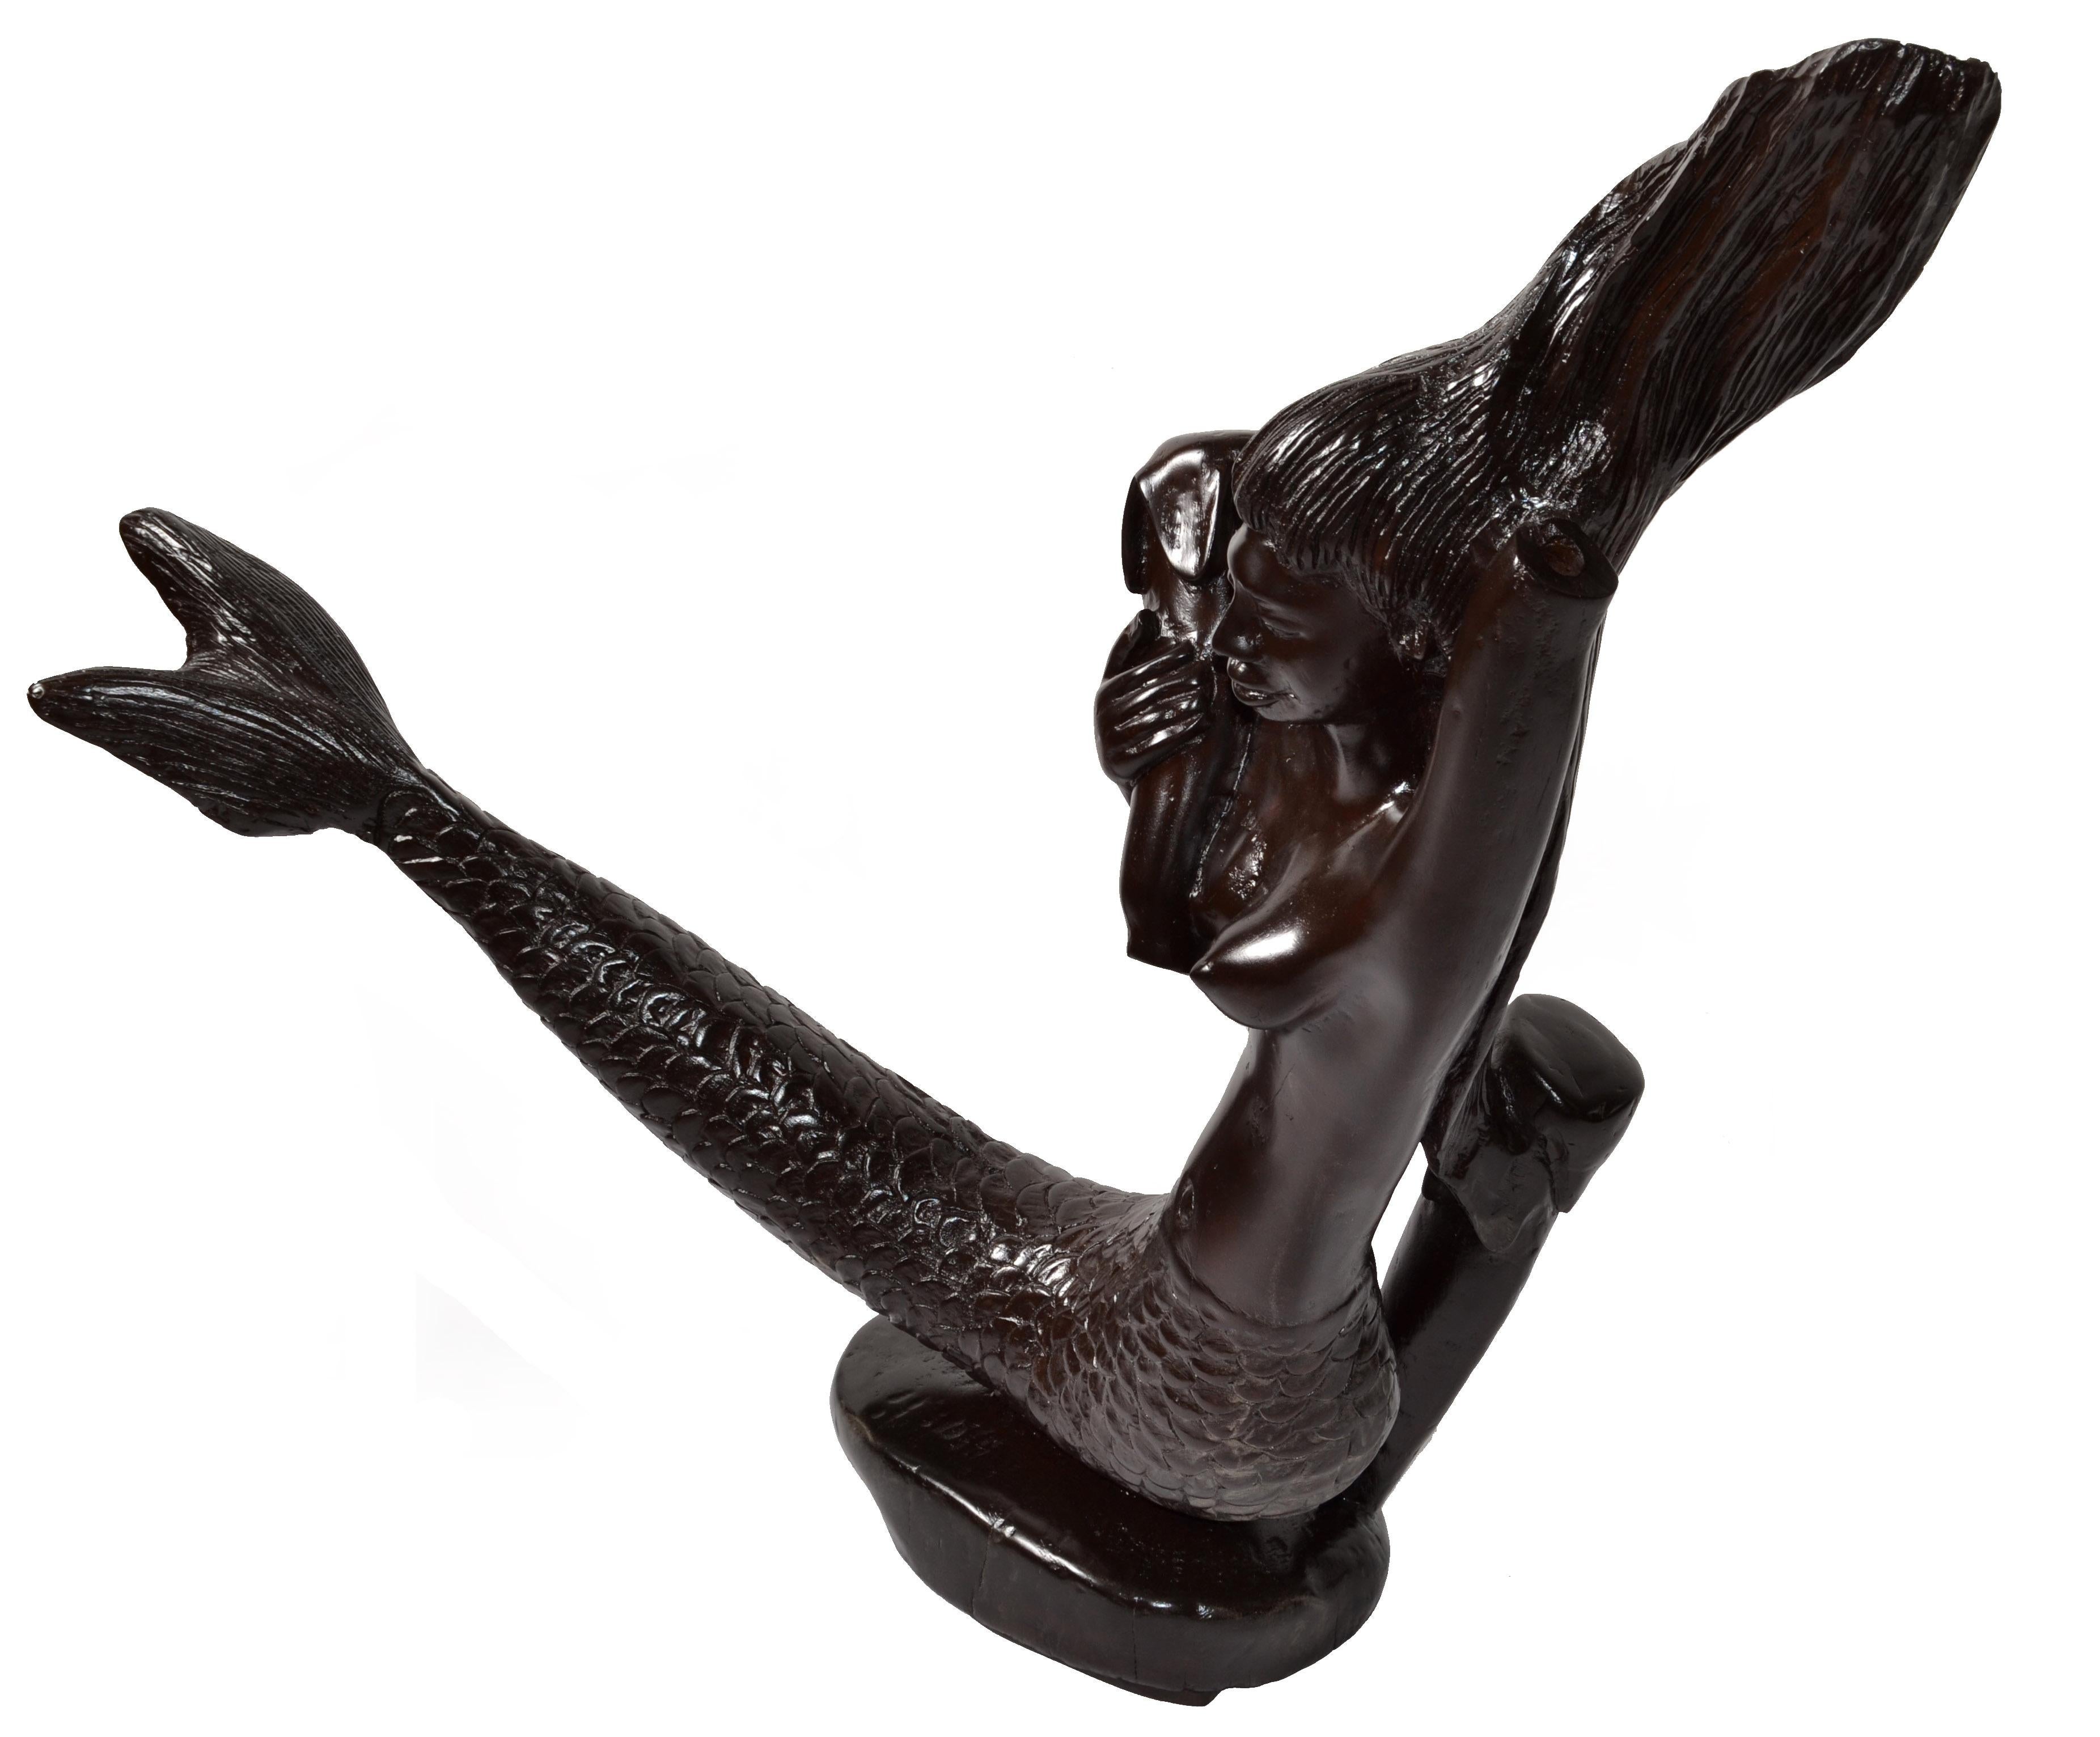 Charming one of a kind, late 19th Century large Mahogany Mermaid Sculpture hand carved out of one piece of solid wood.
Very detailed the Hair and Tail textured carvings, and the sensitivity of the Sculptor with the entire upper body.
The Mermaid